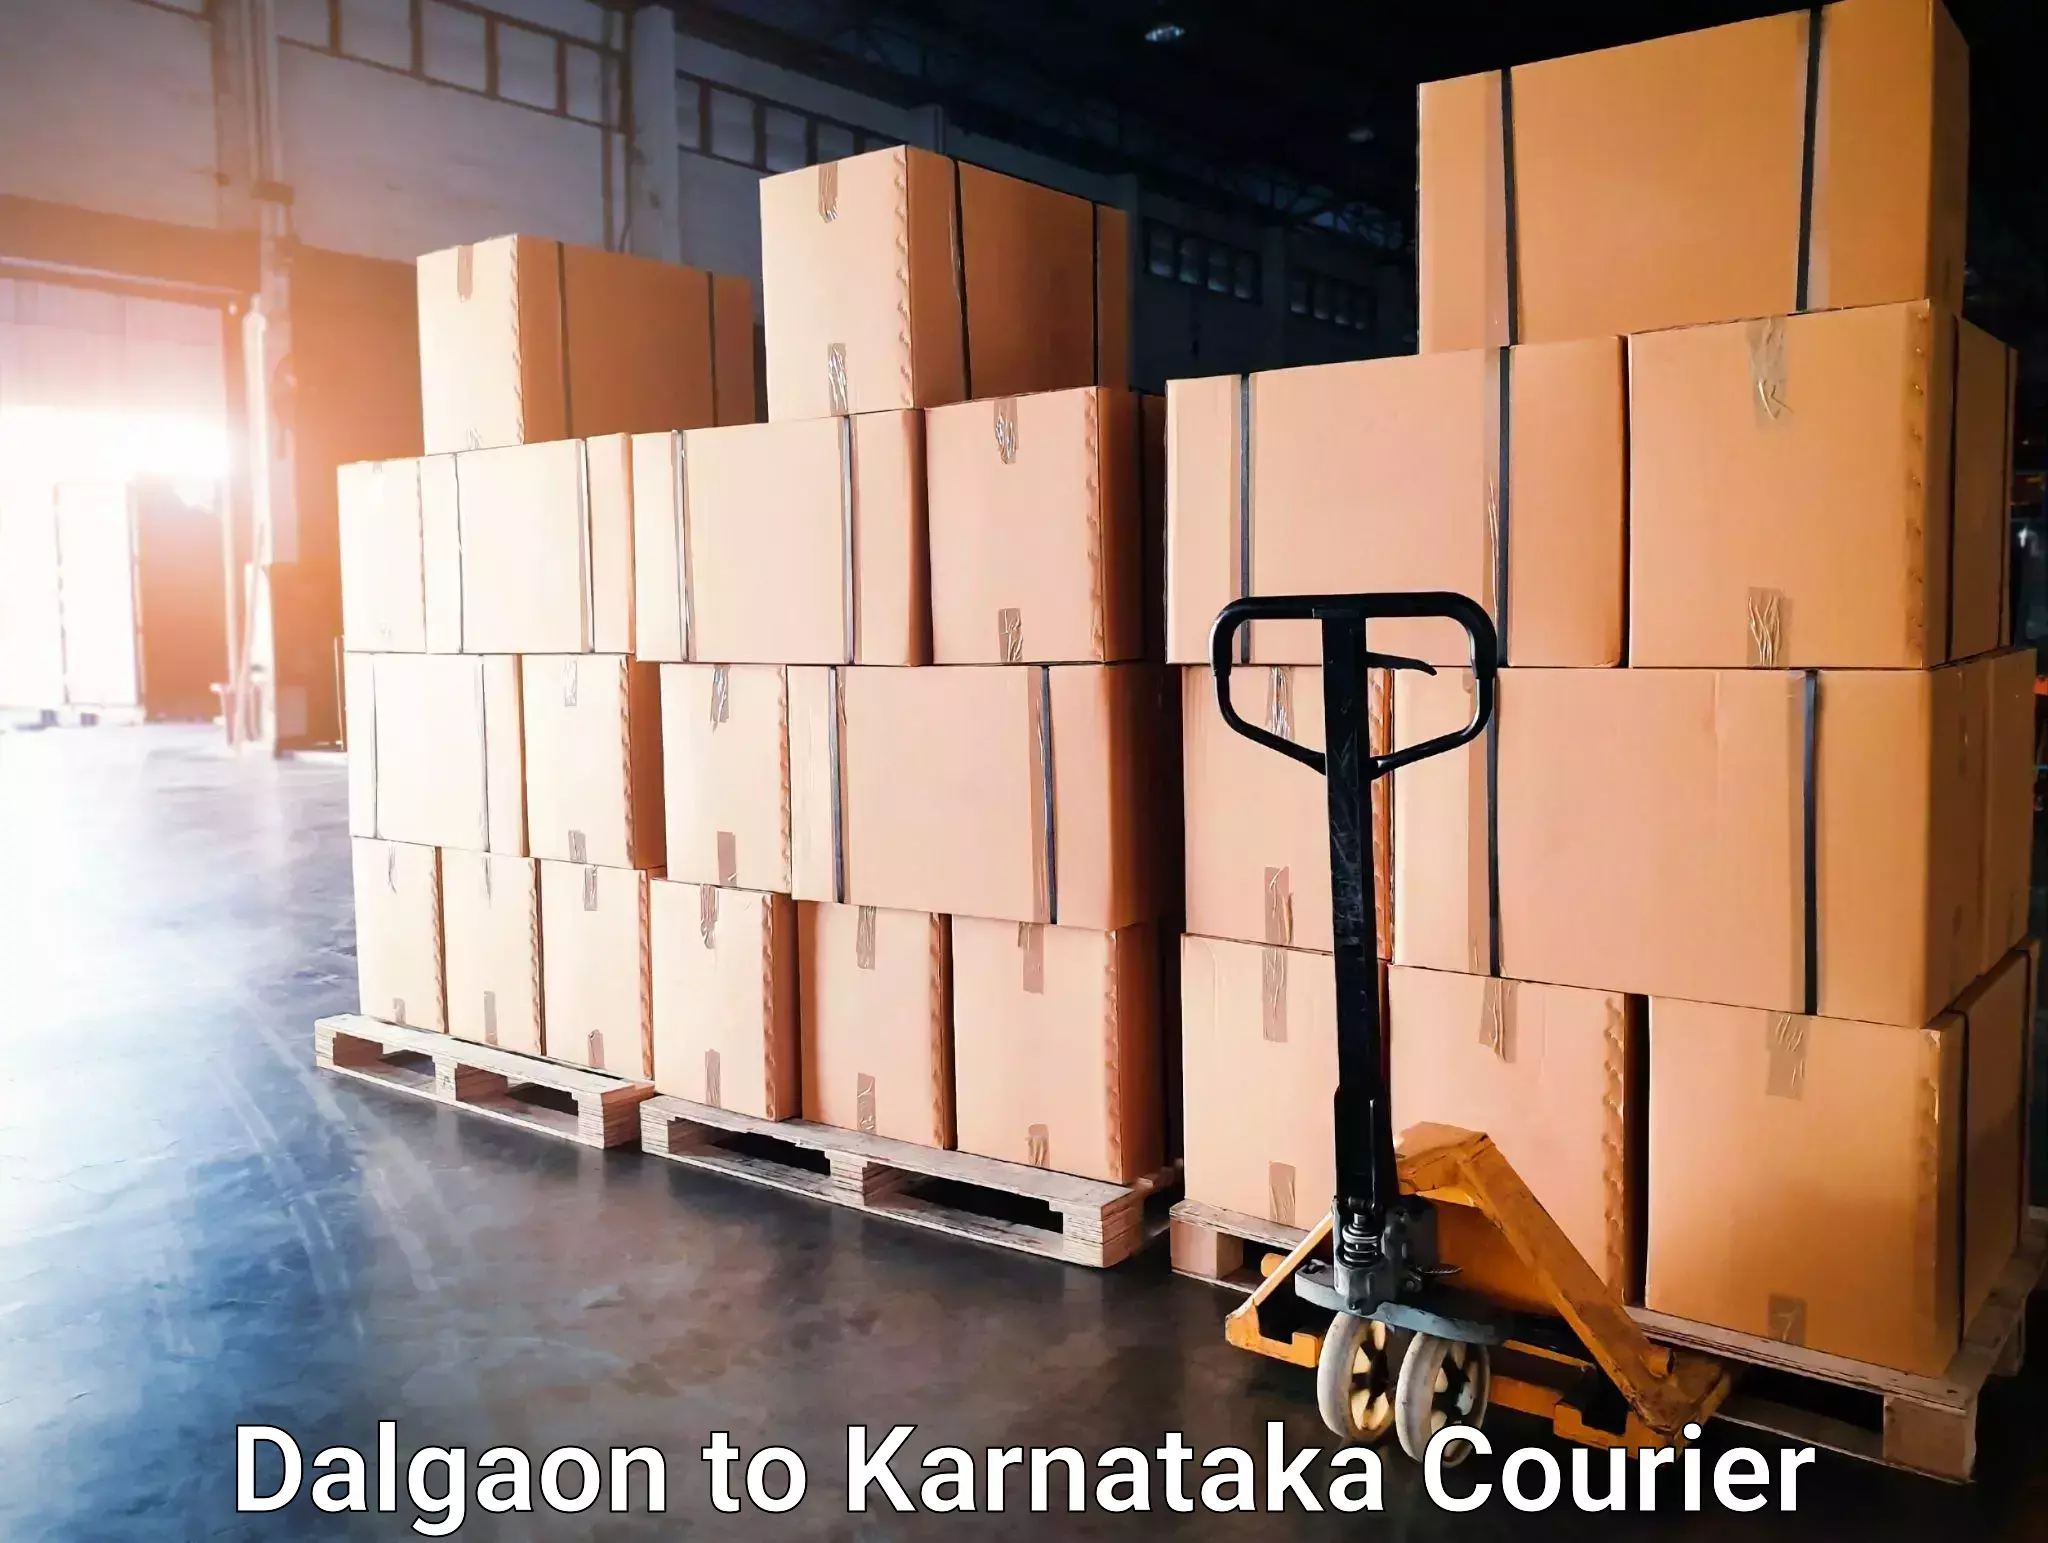 Quality courier services in Dalgaon to Karnataka